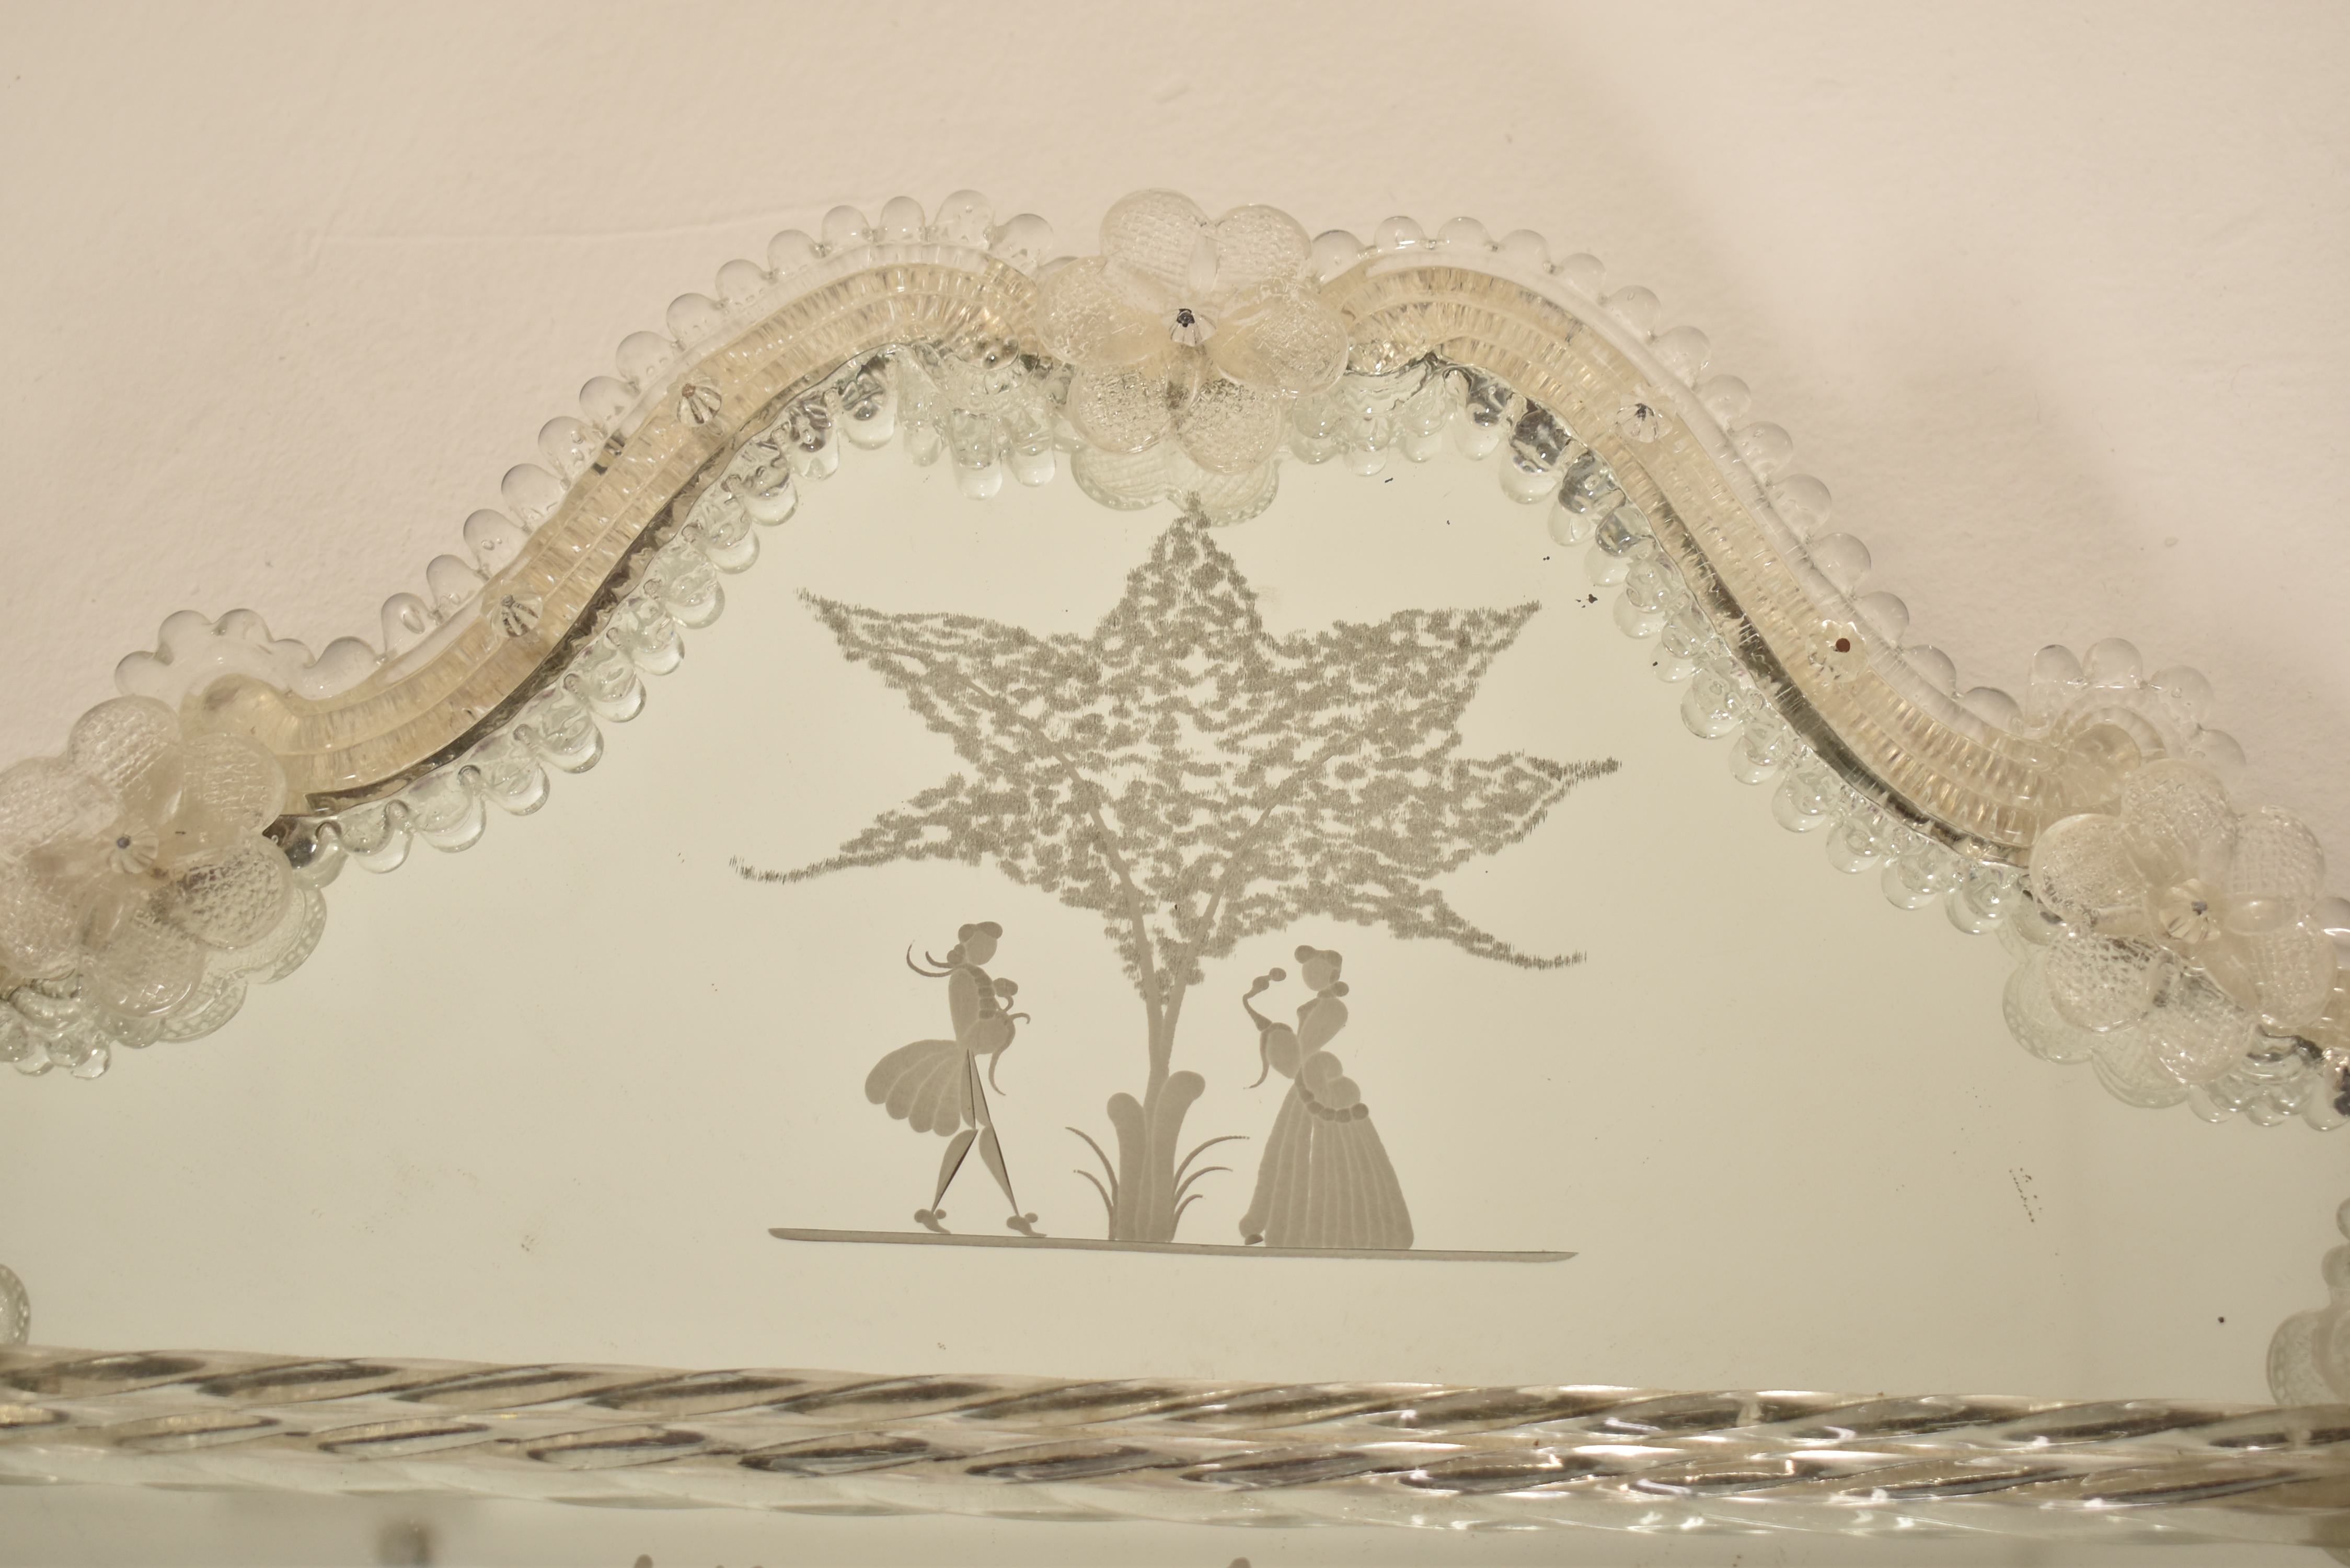 VENETIAN PALAZZO ETCHED GLASS WALL HANGING MIRROR - Image 3 of 5